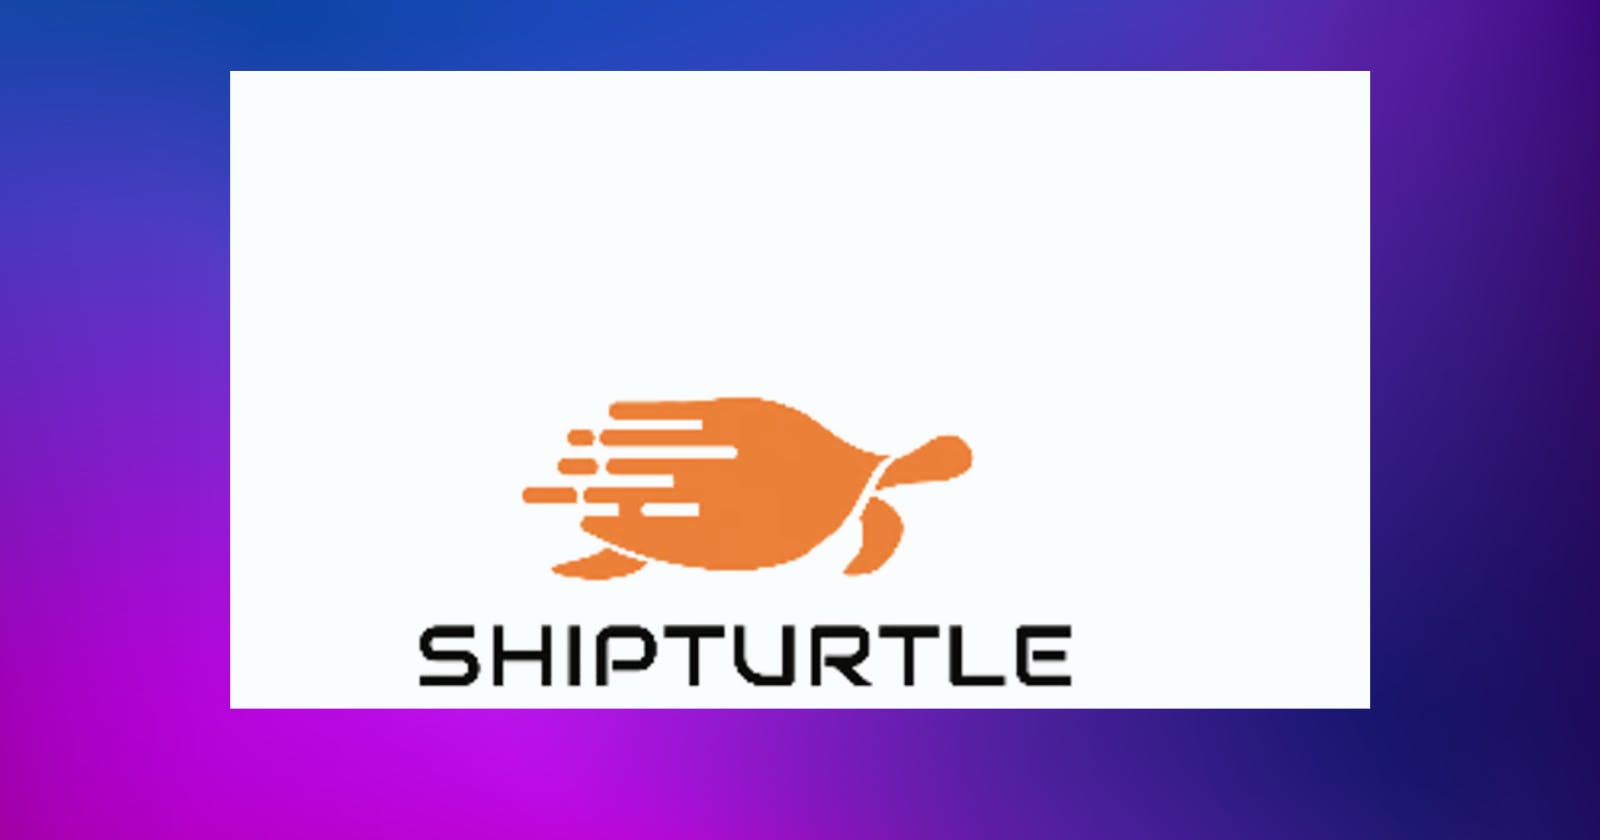 Why Shipturtle Marketplace is the best option on Shopify